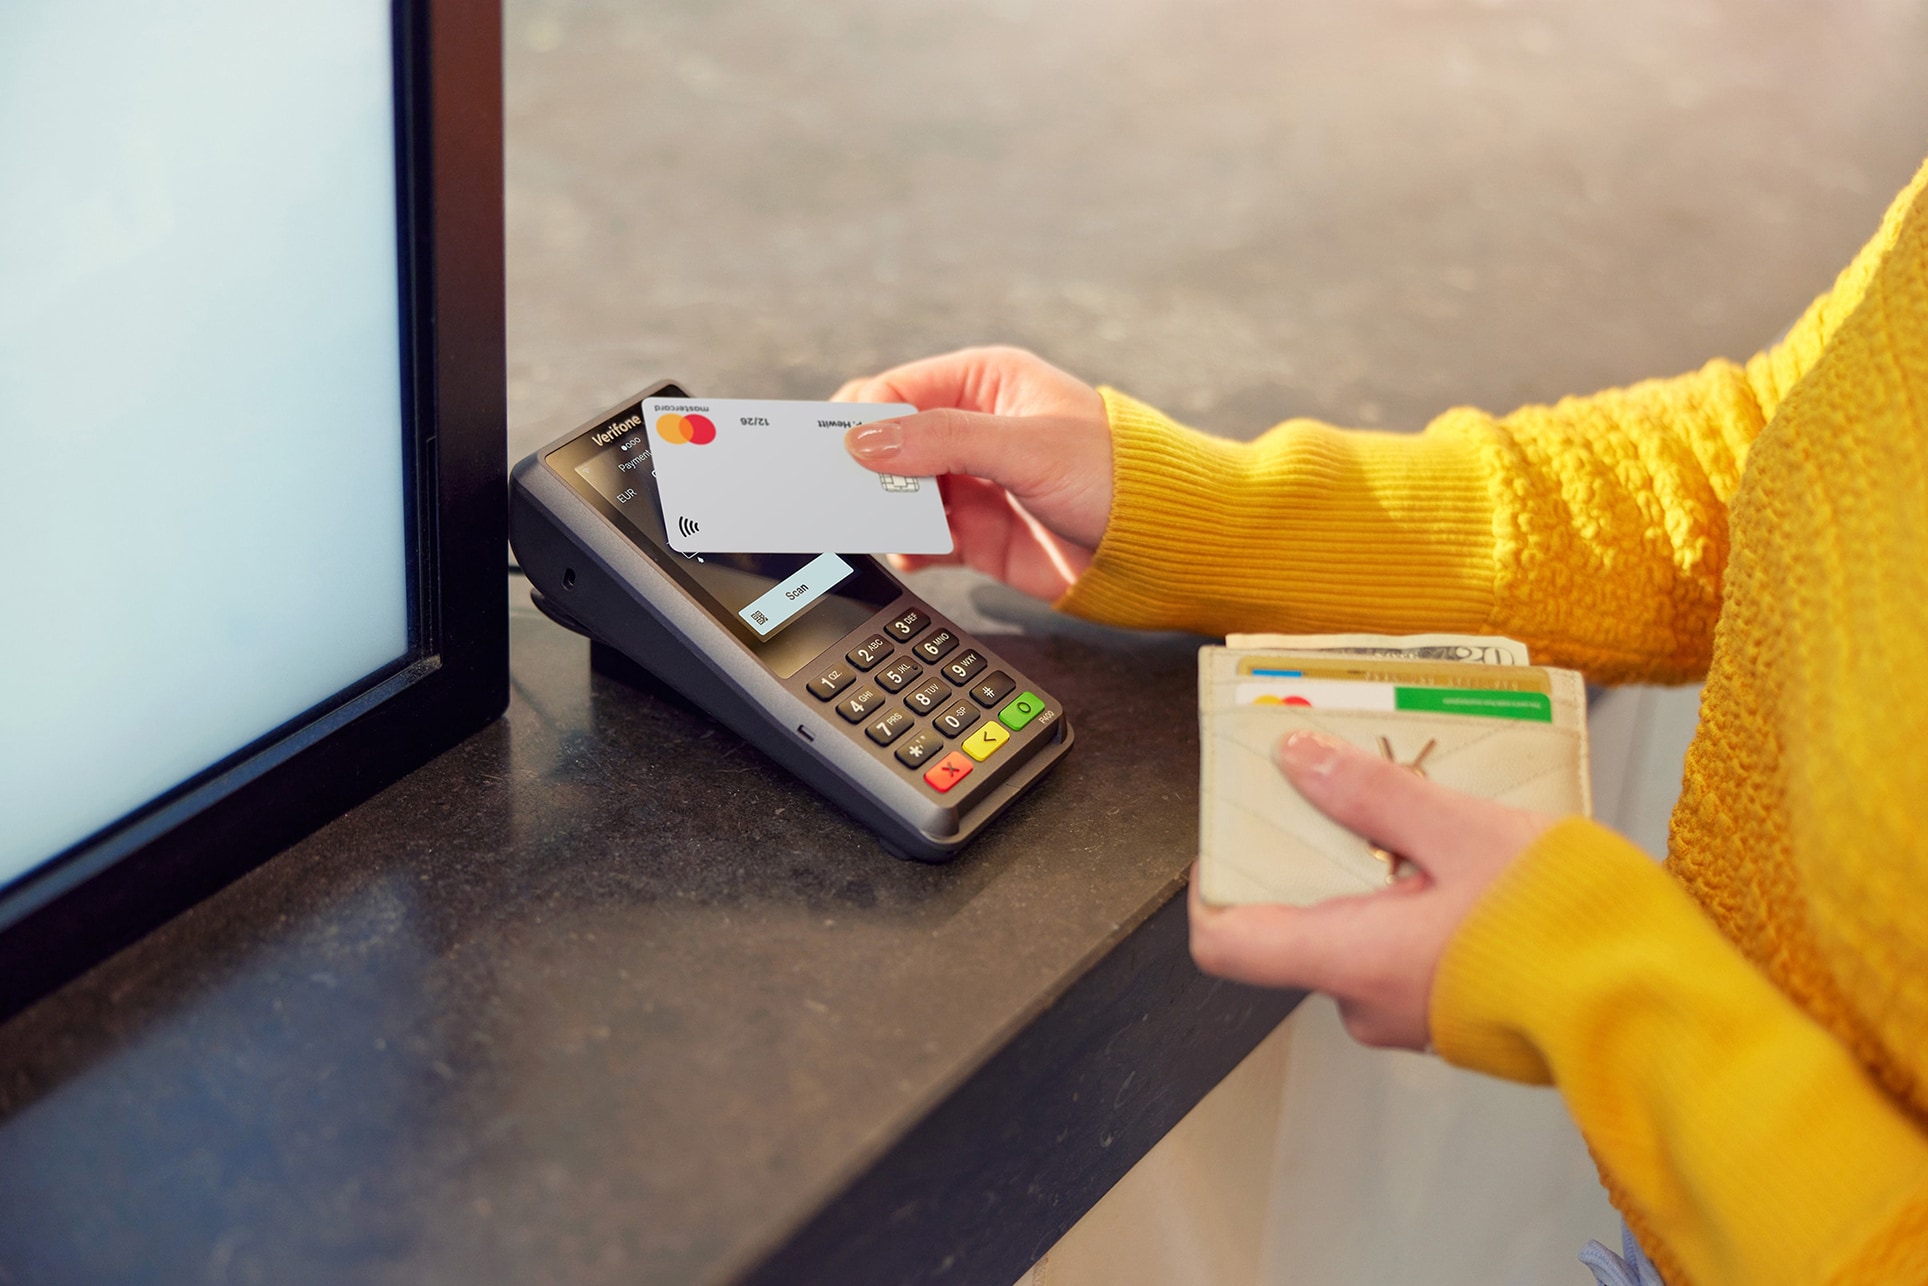 Debit Mastercard is replacing Maestro: Here’s what you need to know